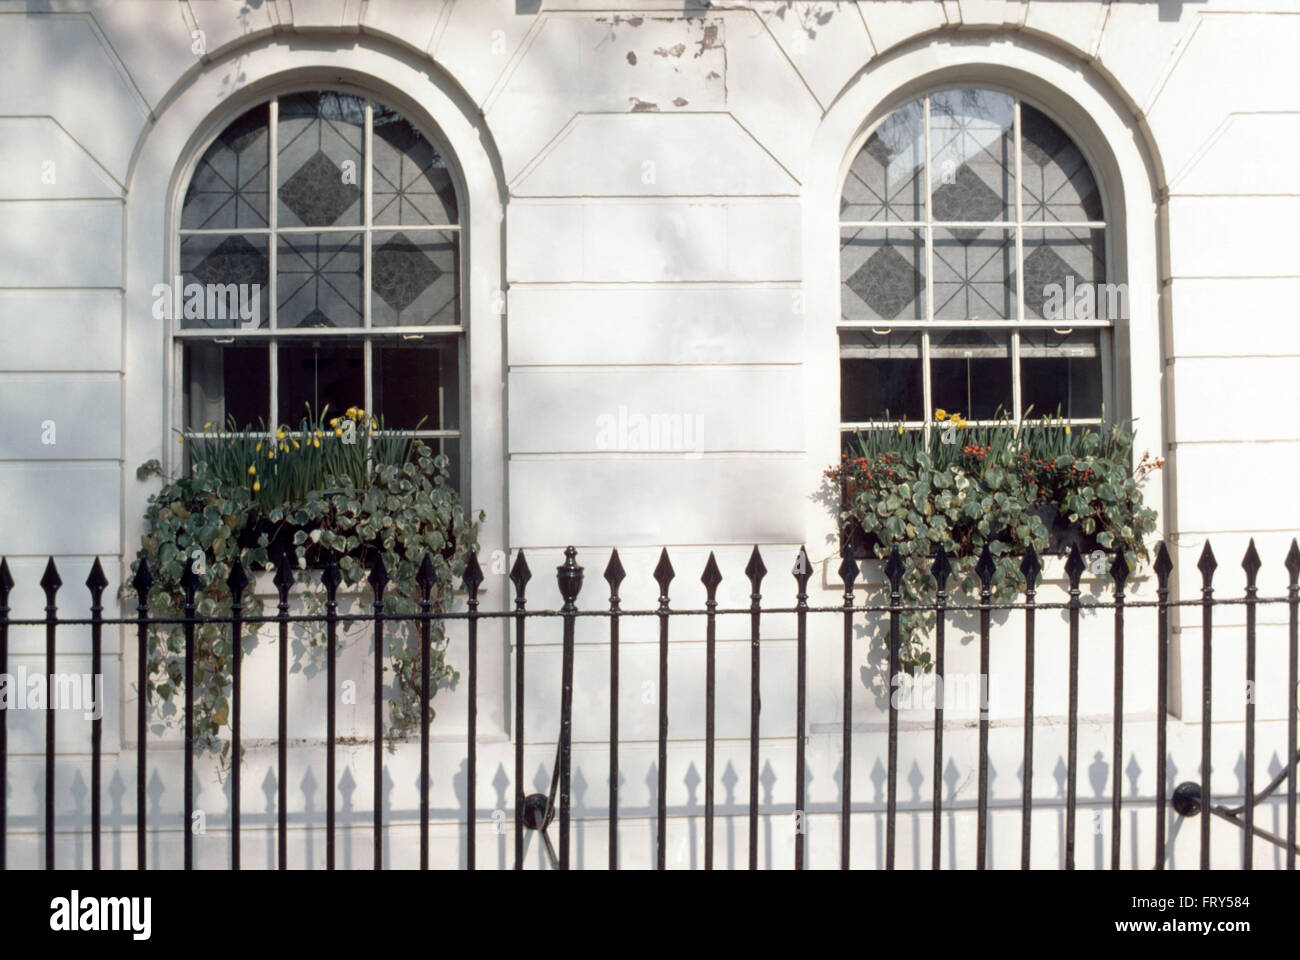 Iron railings in front of Victorian townhouse with arched windows Stock Photo